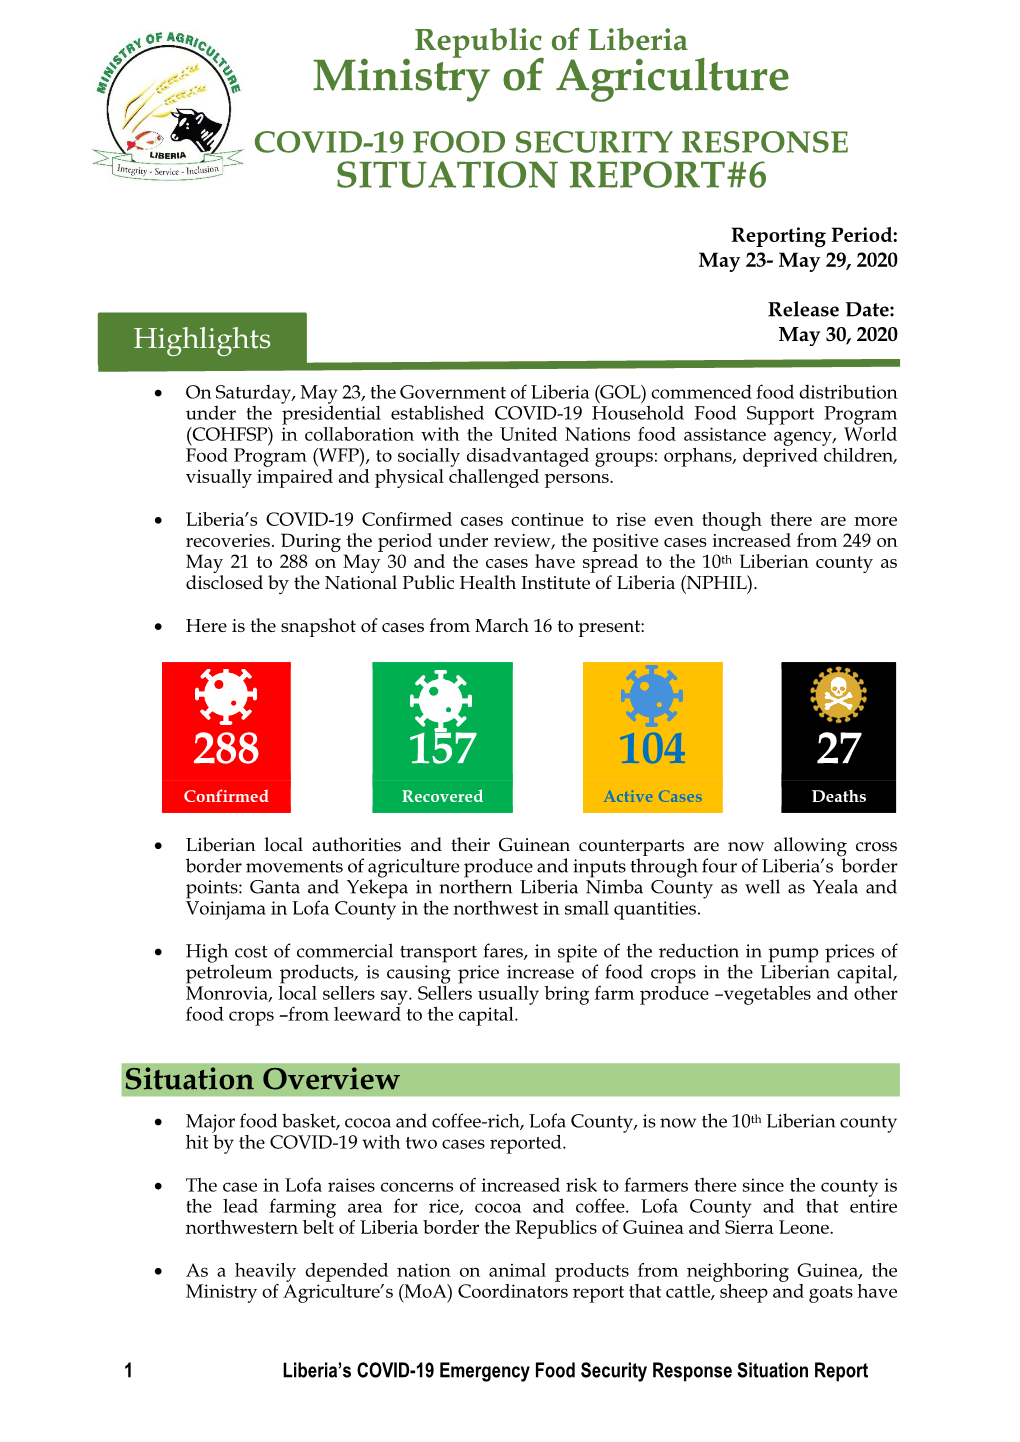 Covid-19 Food Security Response Situation Report#6